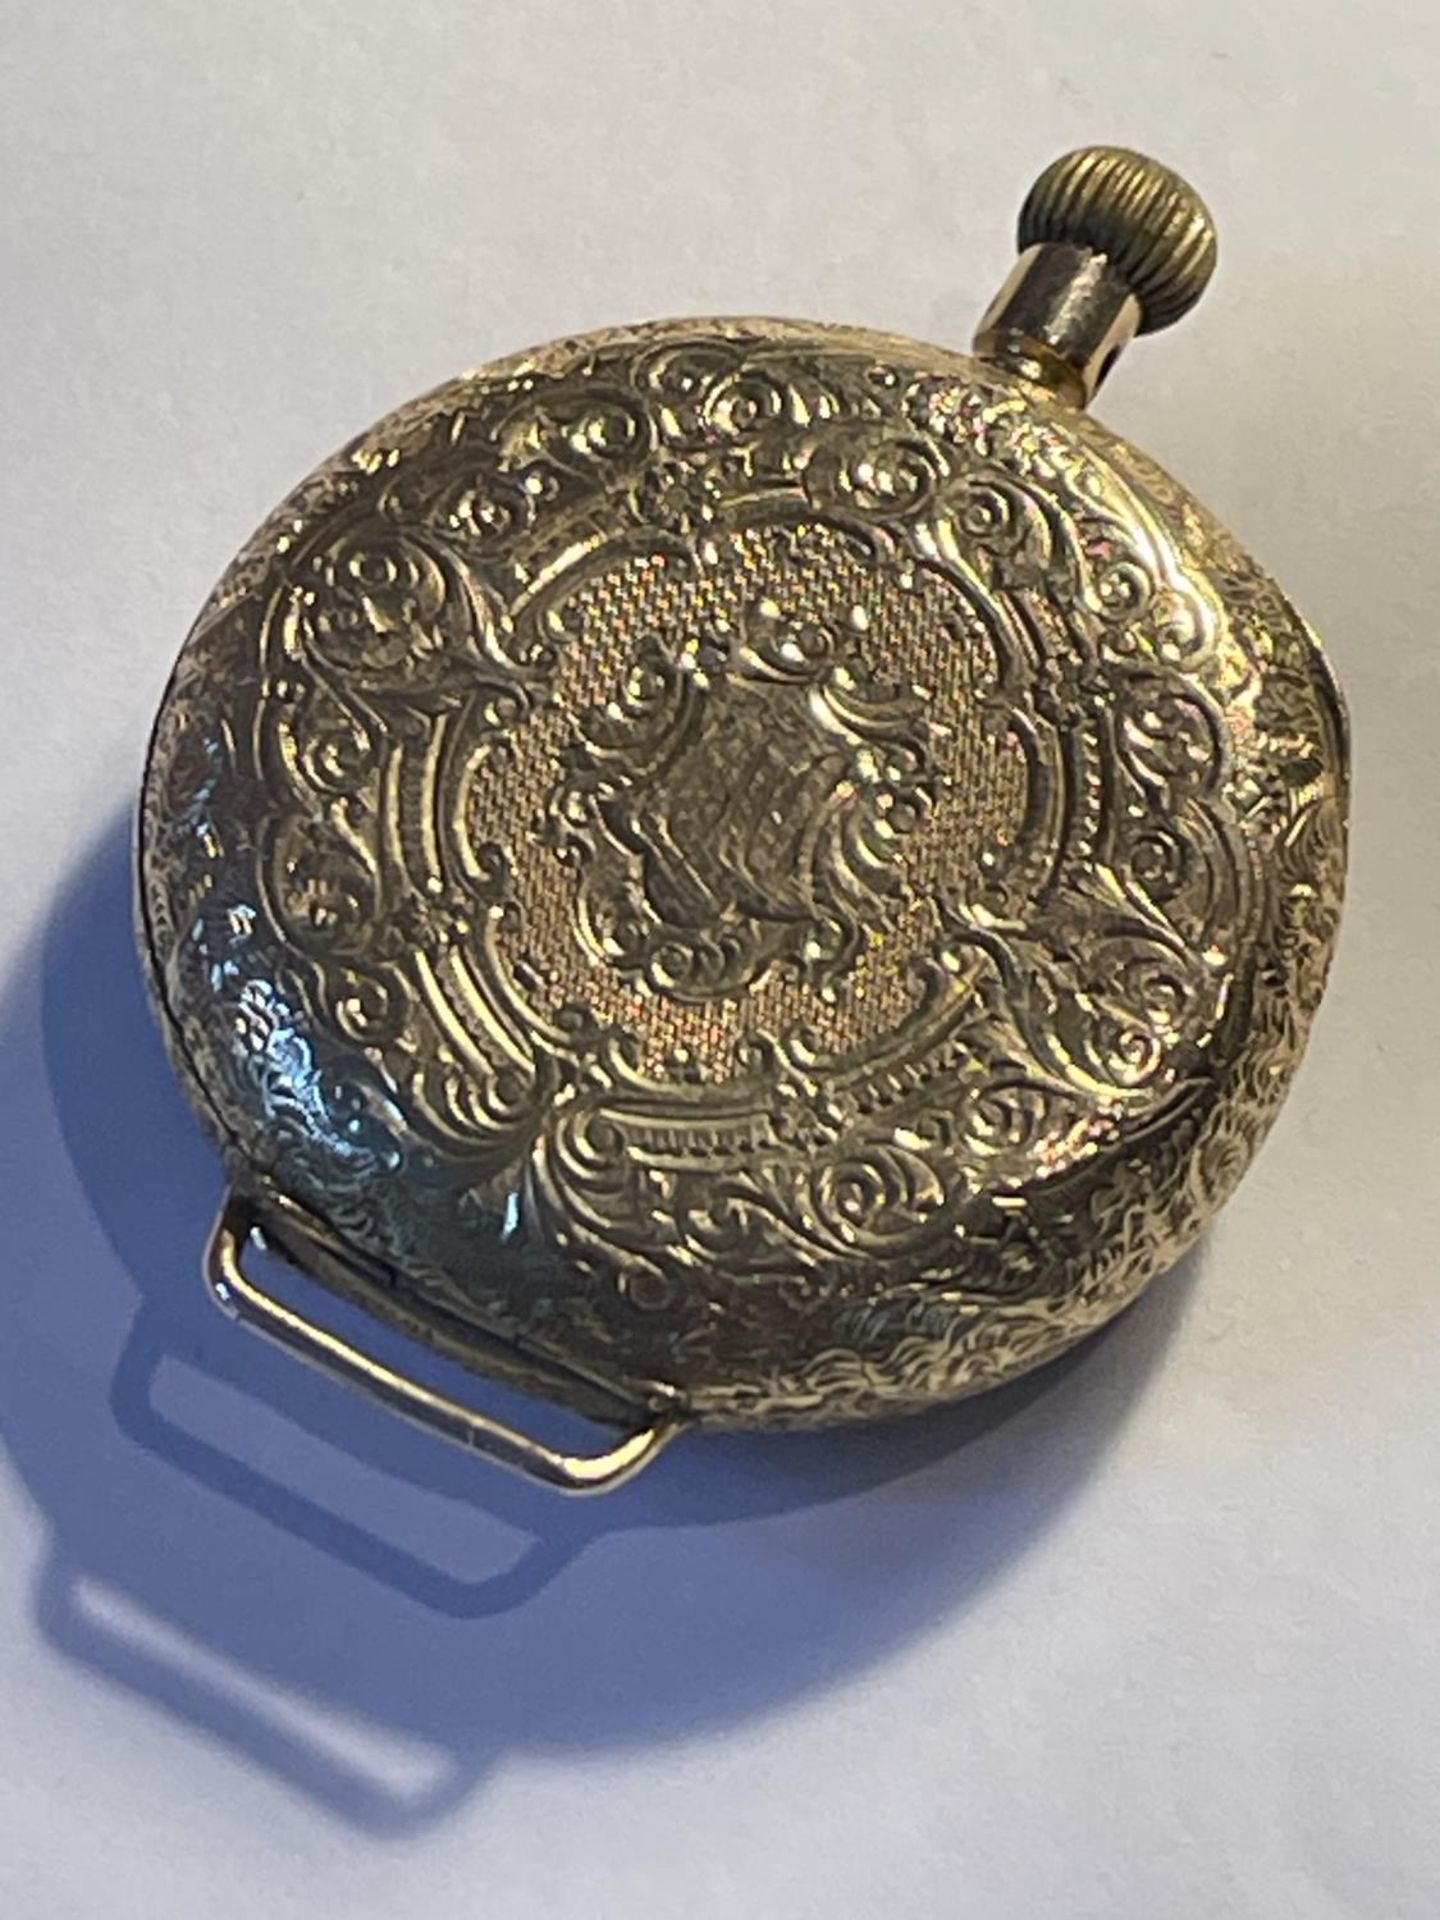 A 14CT GOLD LADIES OPEN FACED POCKET WATCH GROSS WEIGHT 32.37 GRAMS - Image 2 of 4